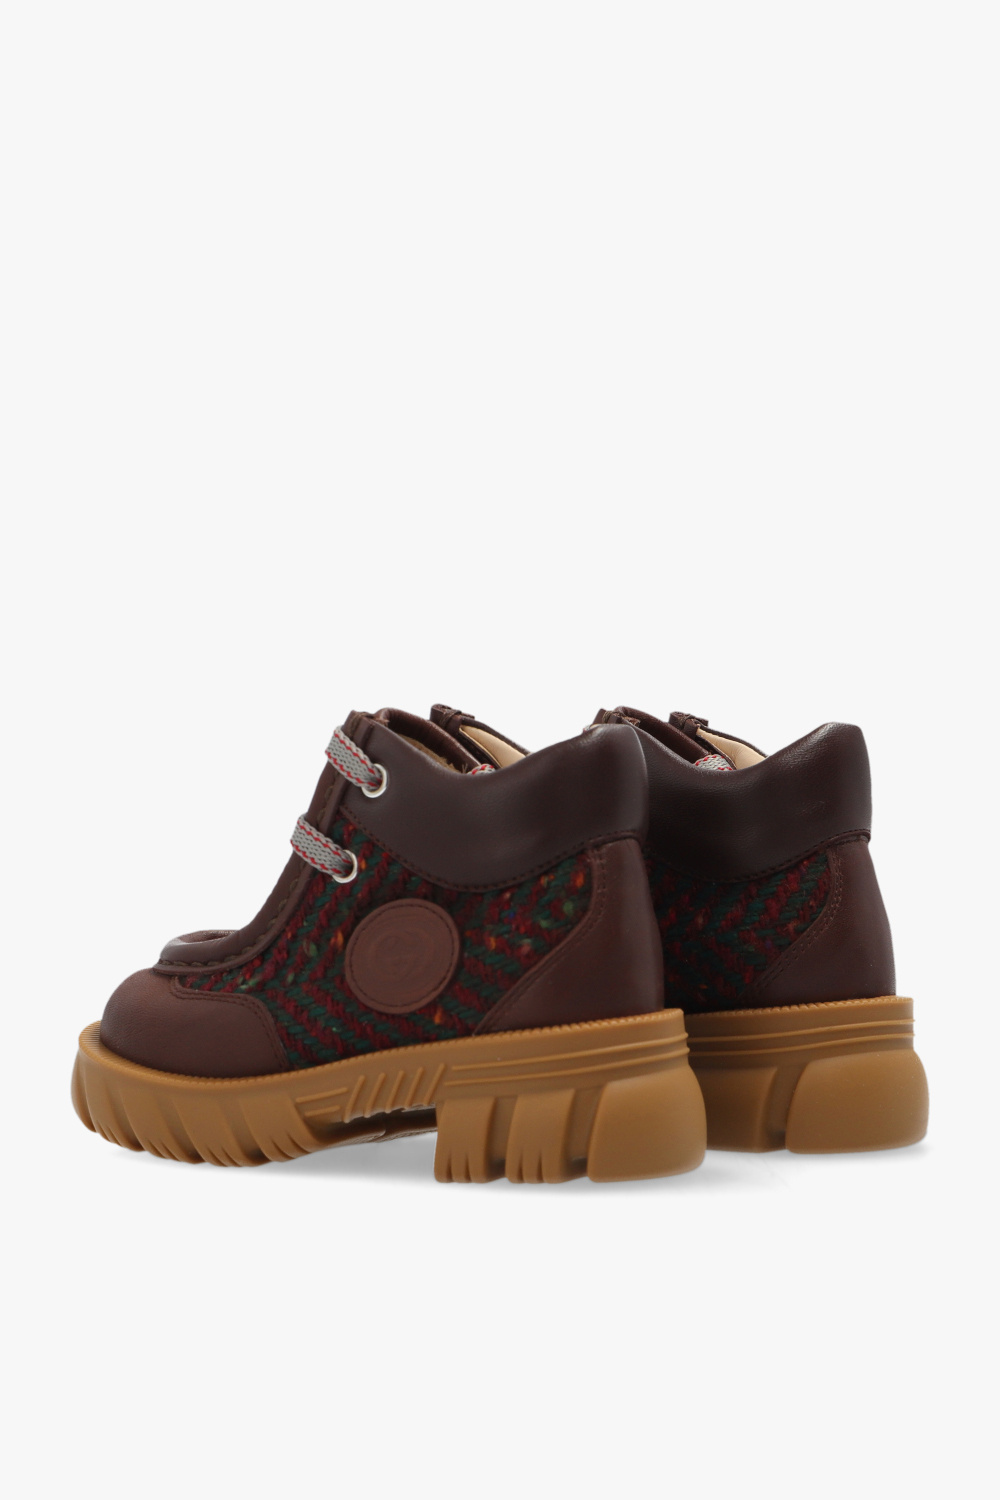 gucci Acciaio Kids Leather boots